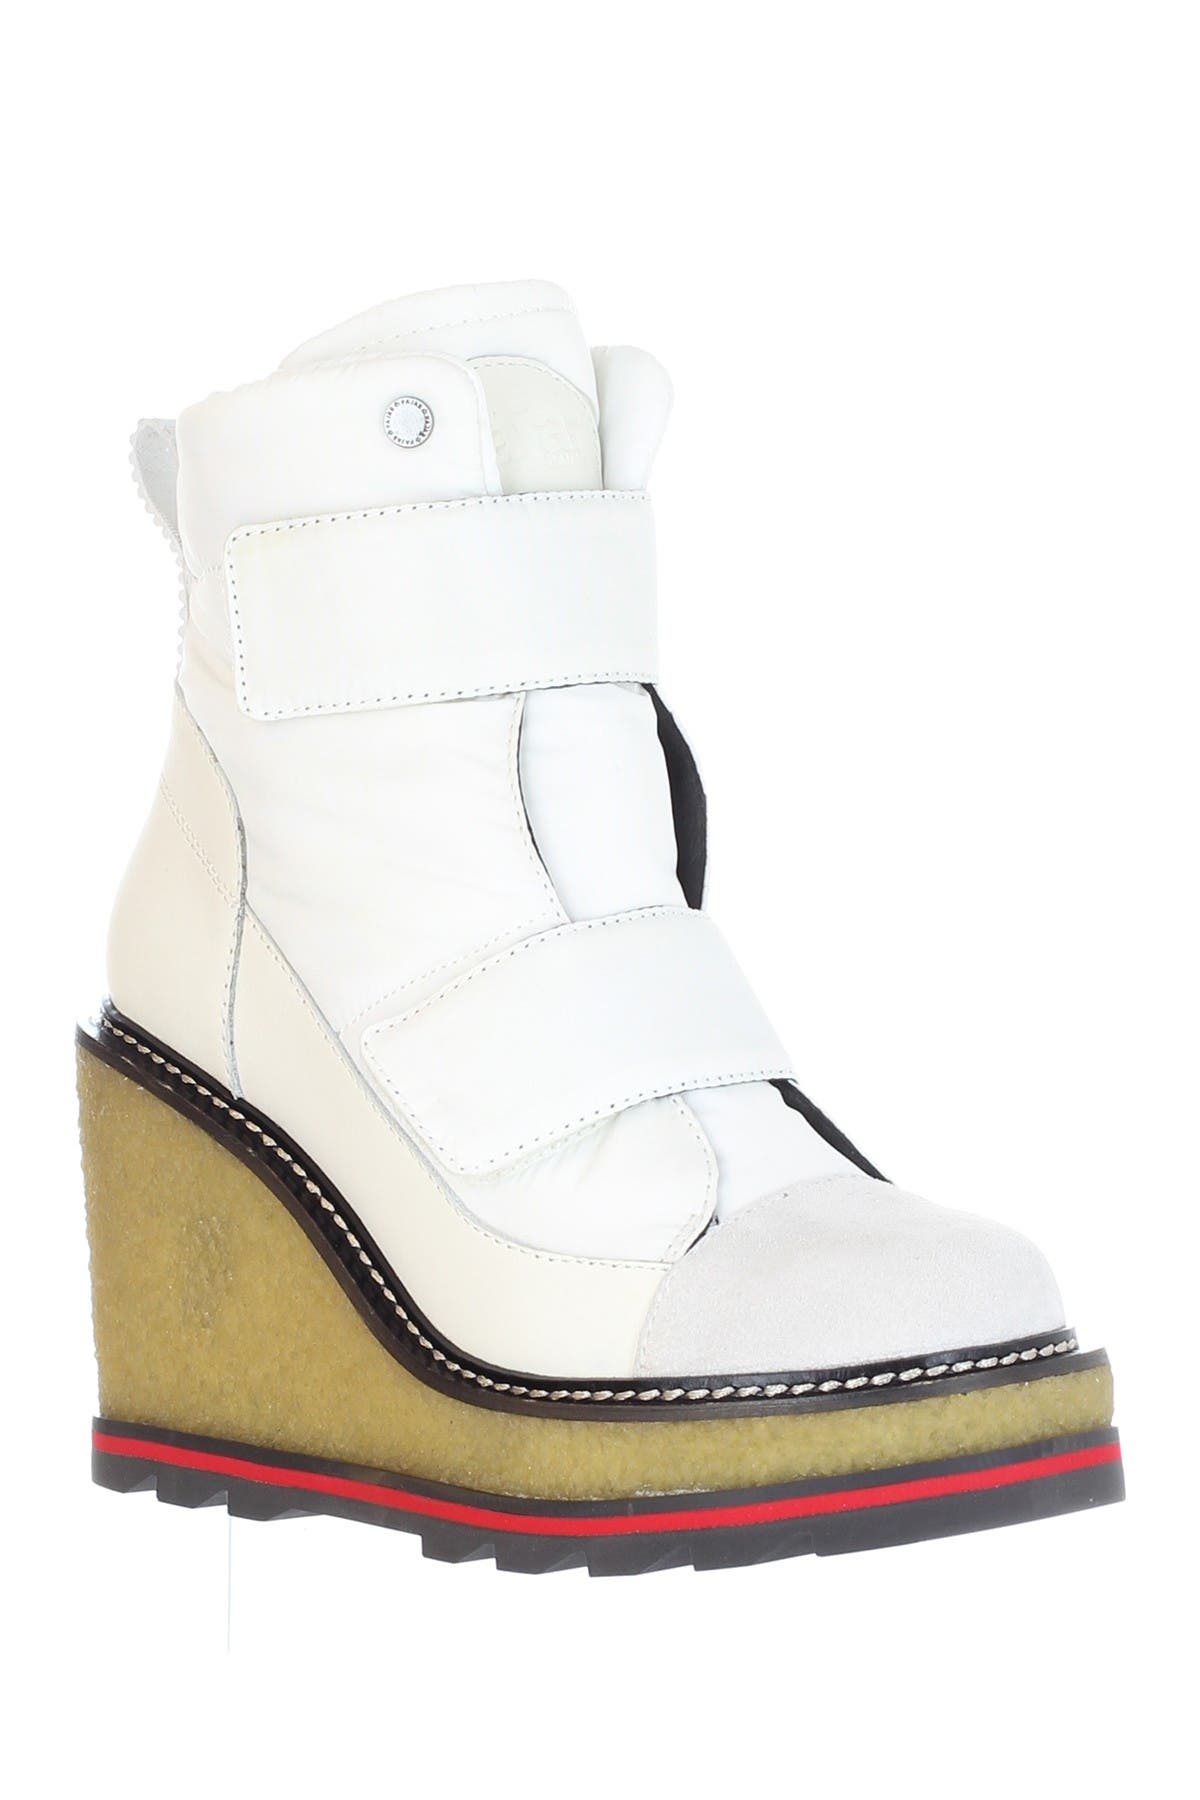 pajar wedge boots